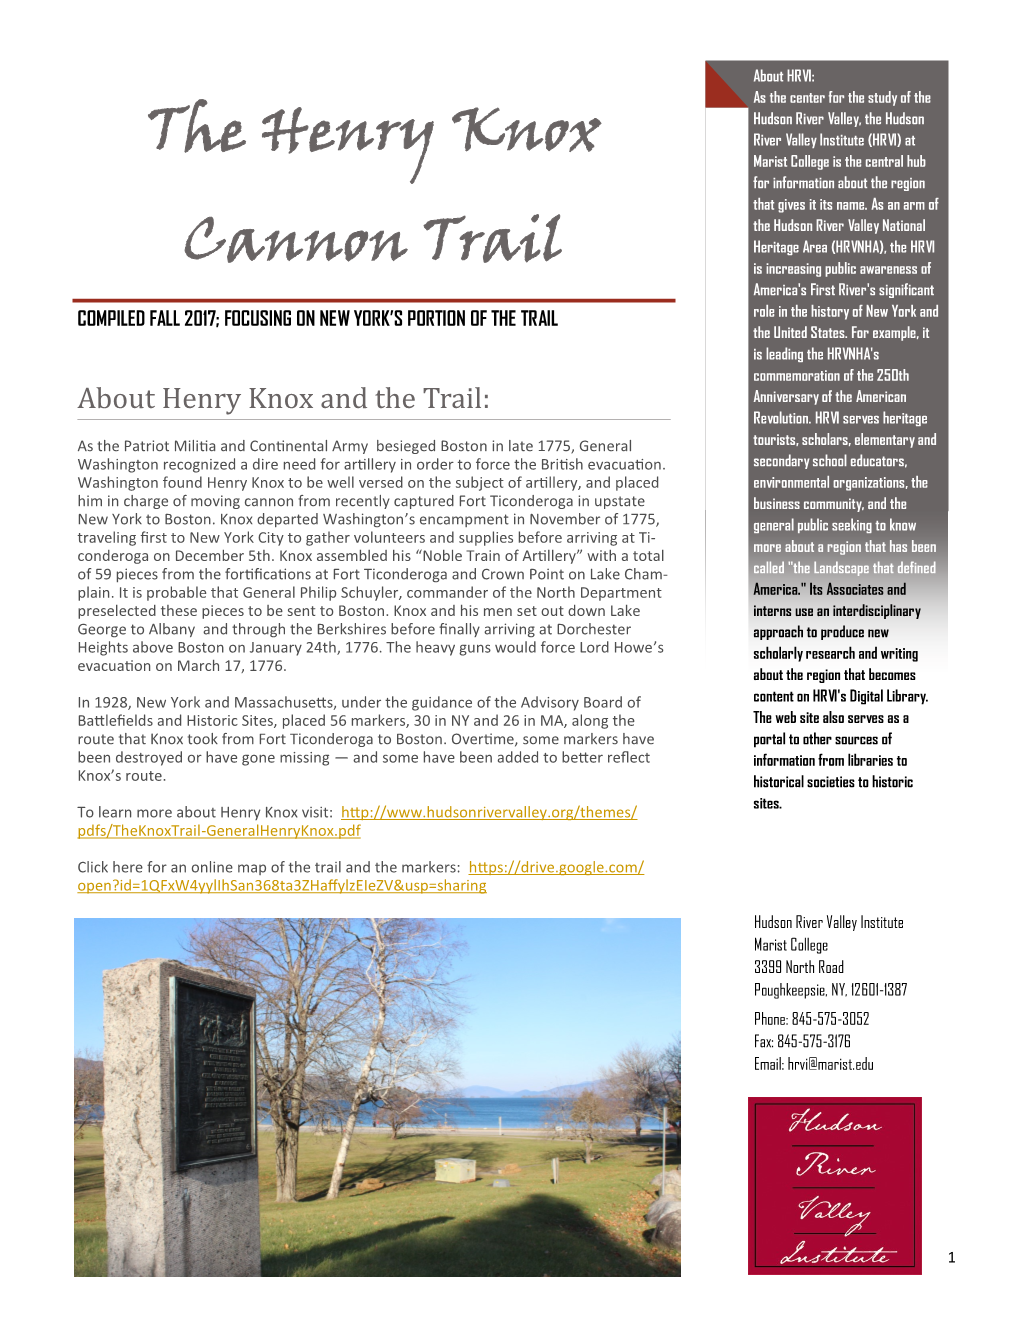 The Henry Knox Cannon Trail